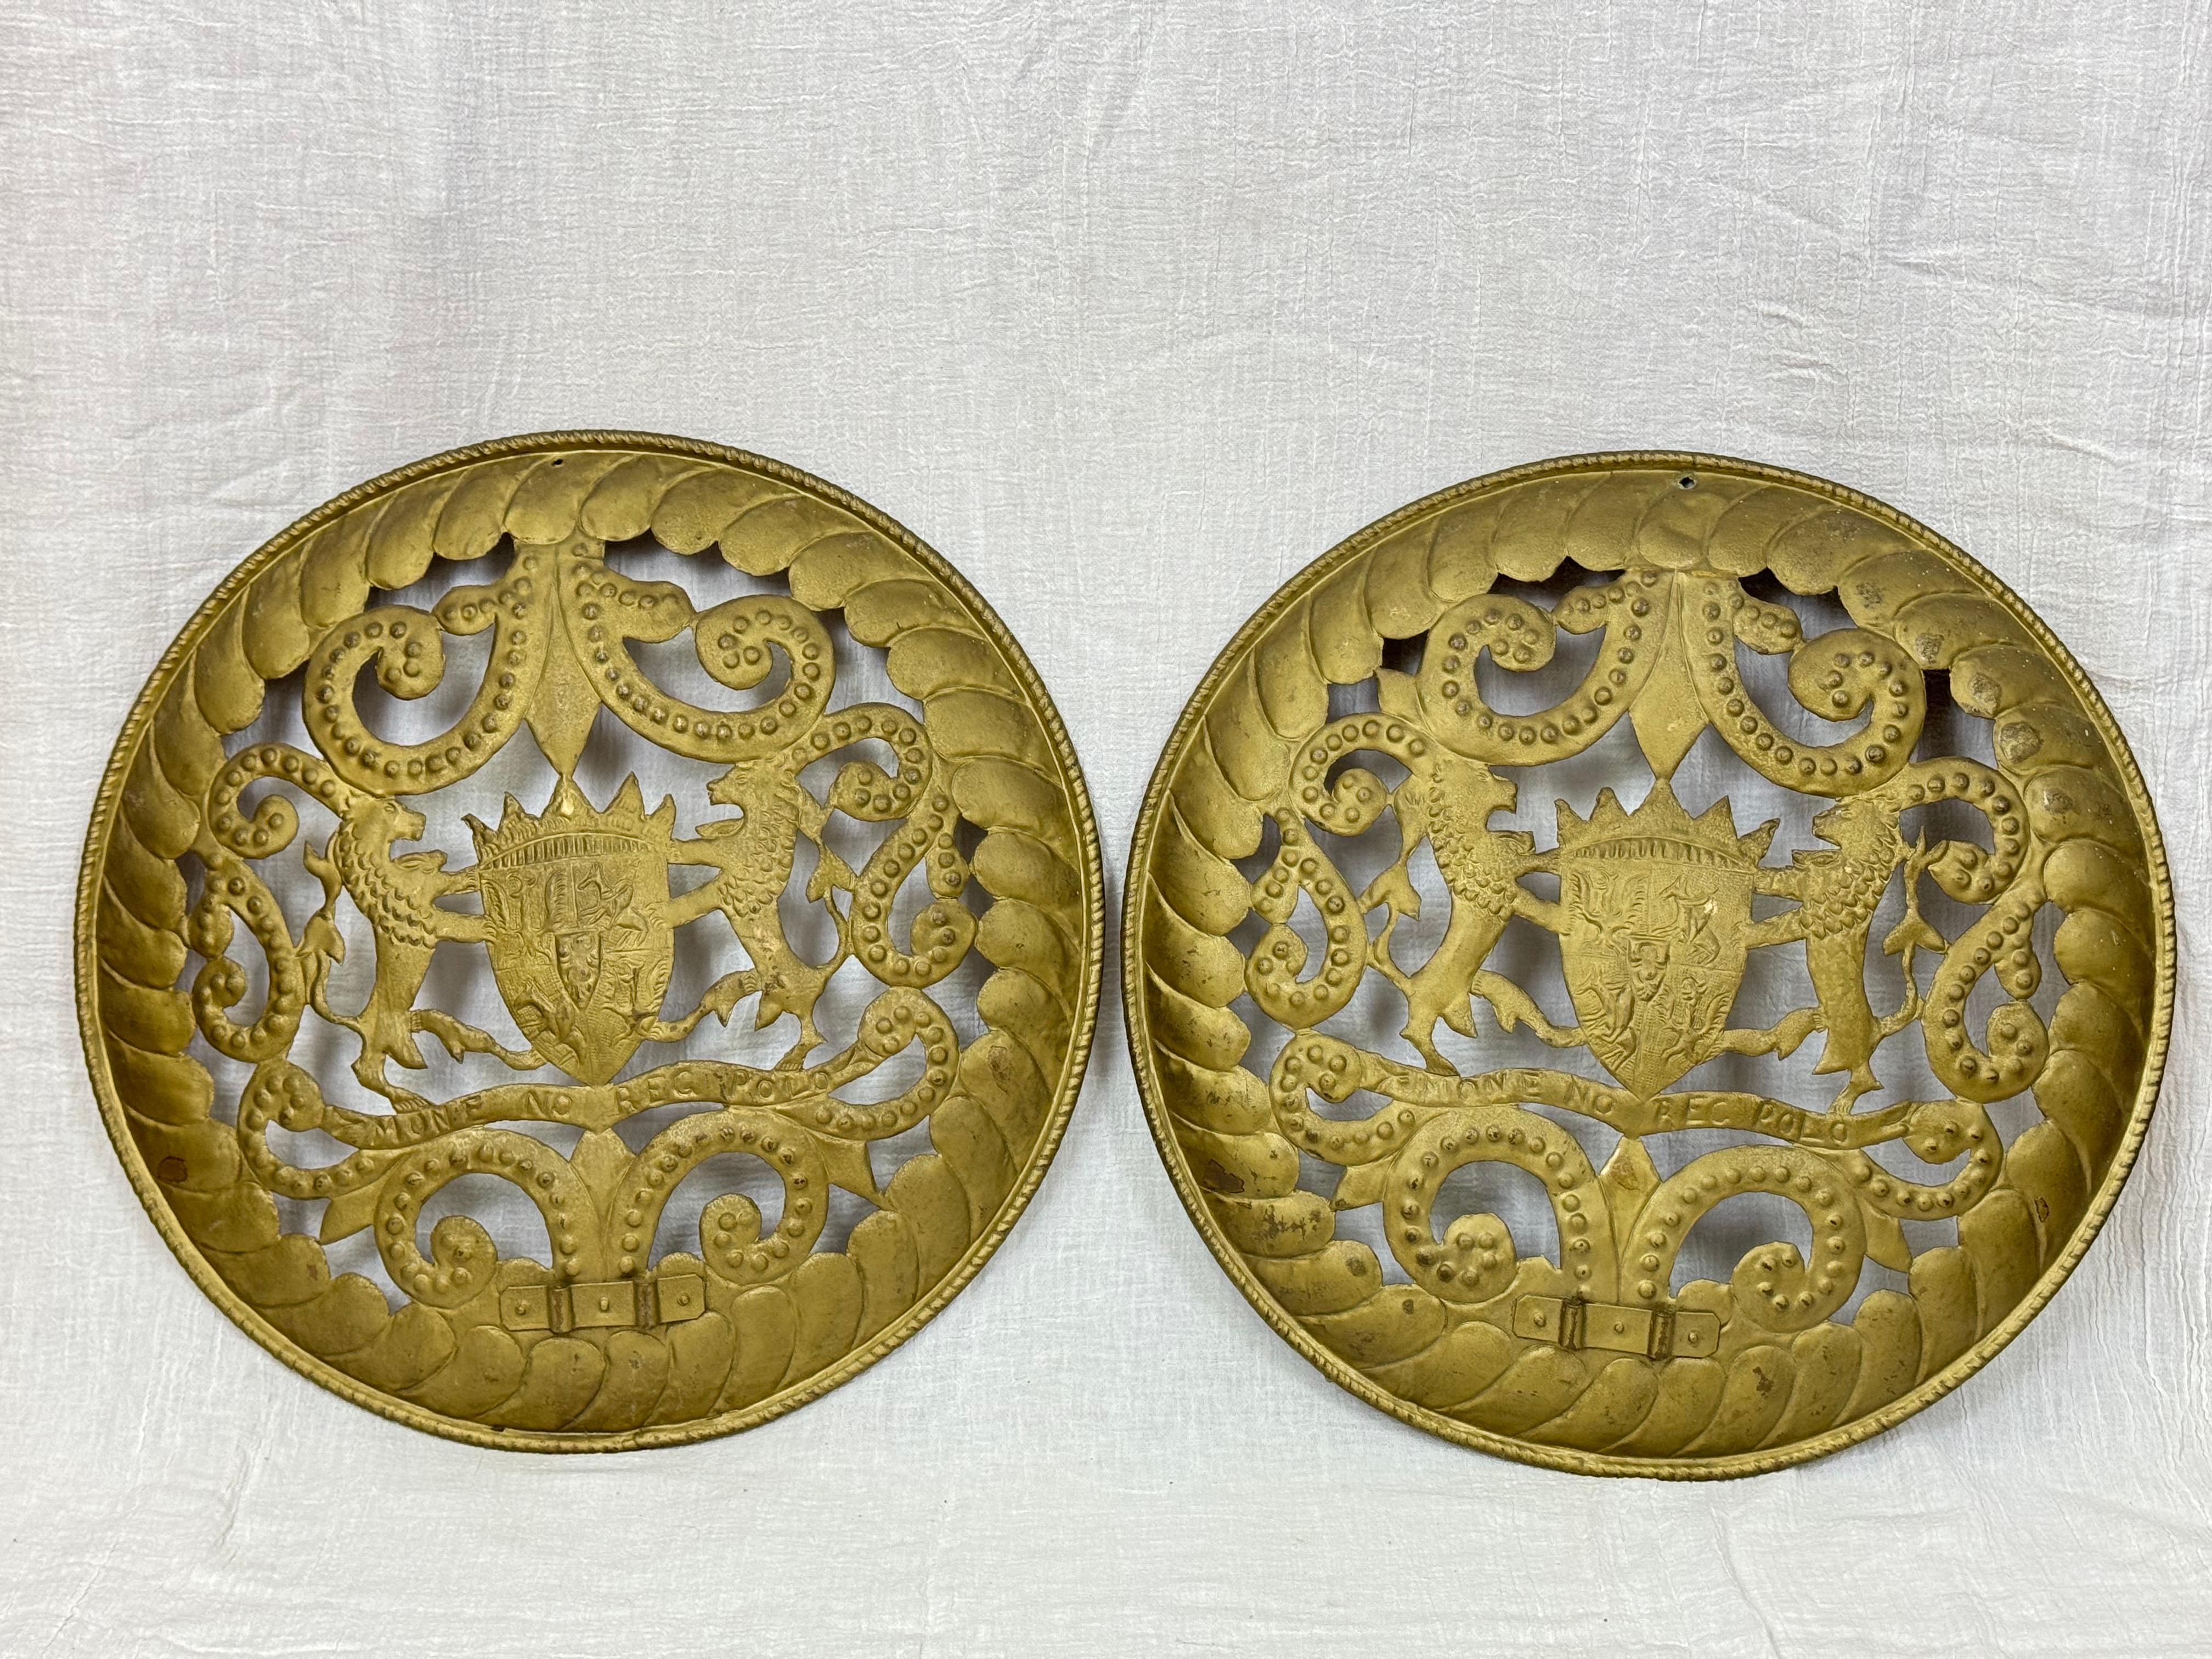 Pair of Shield Form Wall Sconce Bases. Nice large round decorative design. Originally had sconce arms but even gorgeous without them. Classic Regalia design to display an emblem or Royalty. Price is for pair/set of 2